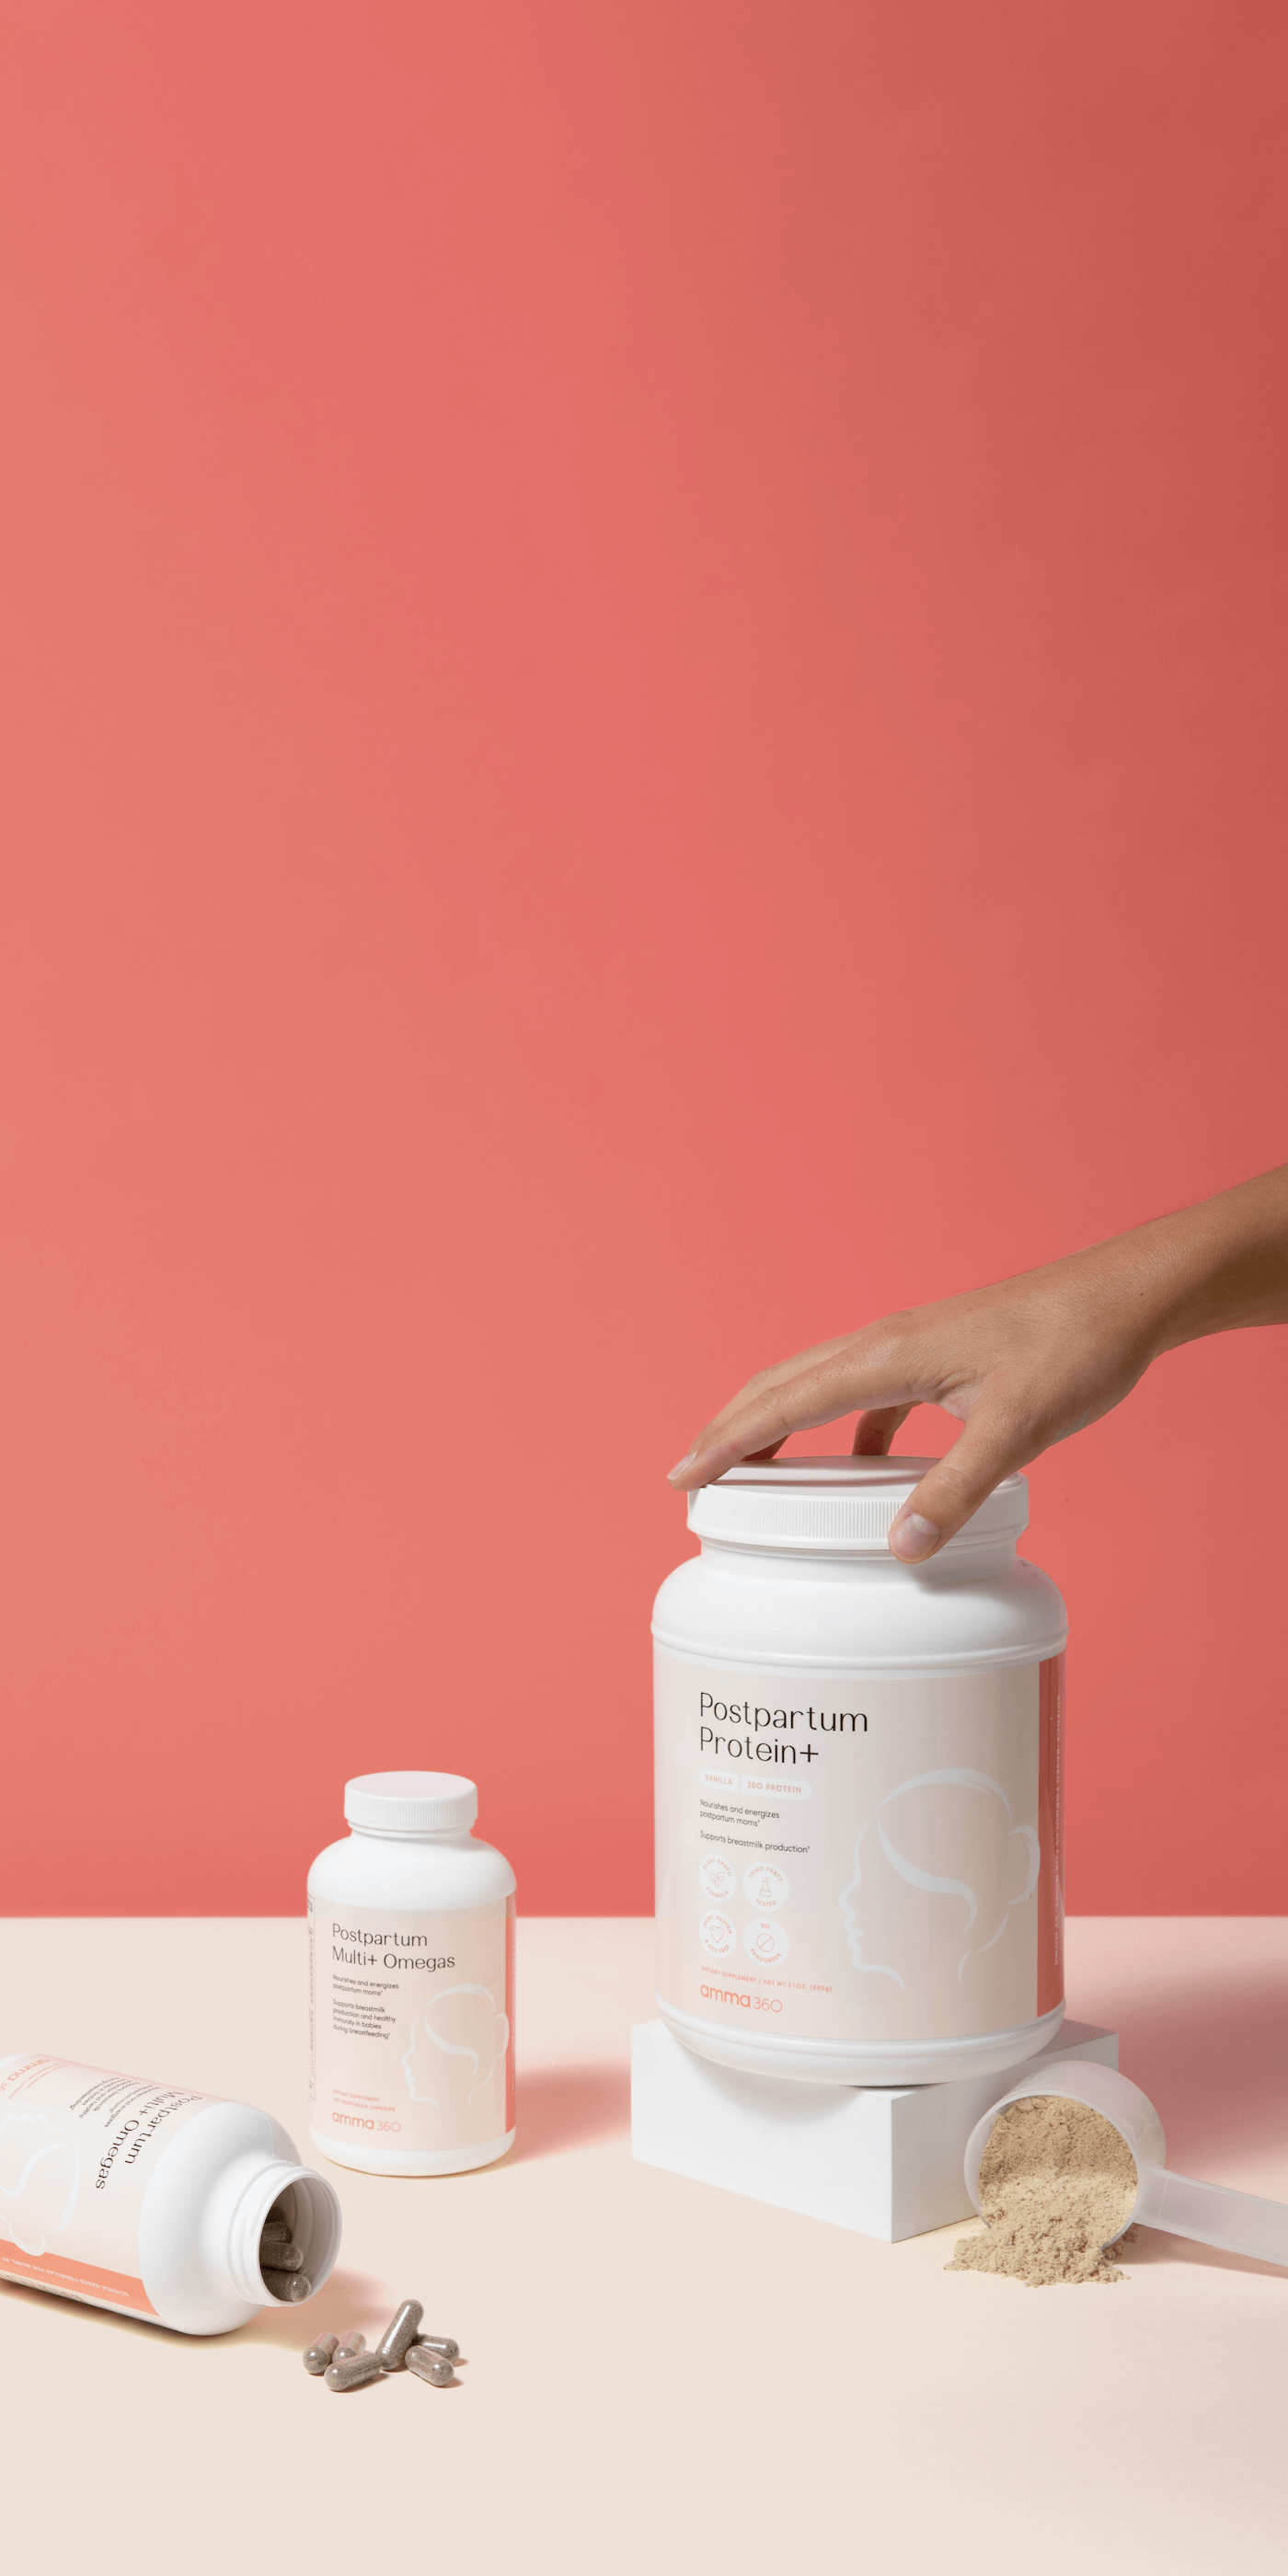 Postpartum product bundle image with hand holding product and capsules poured out on tabletop